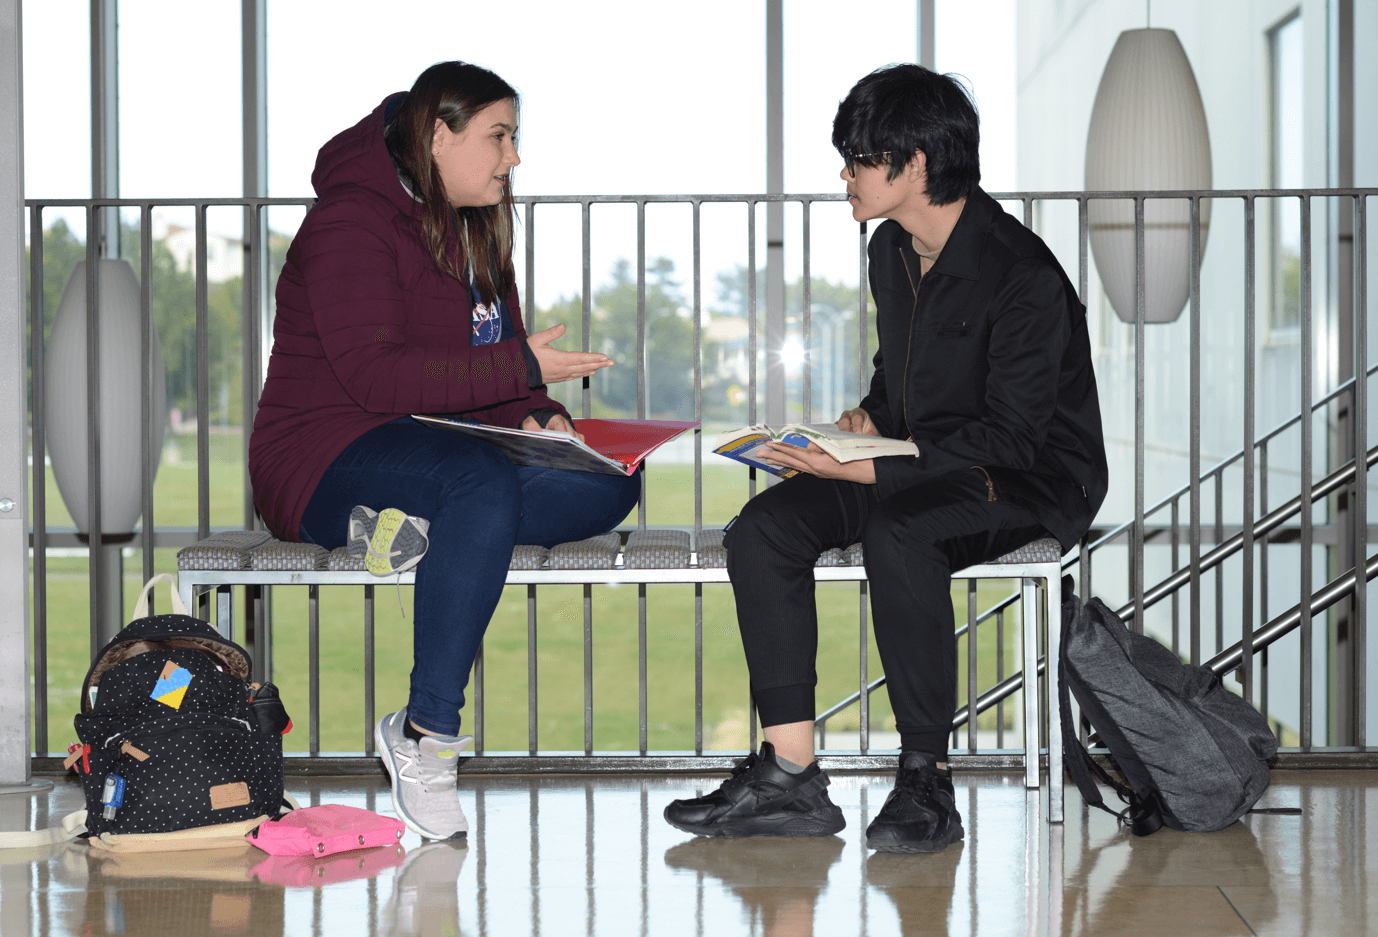 two students on a bench talking